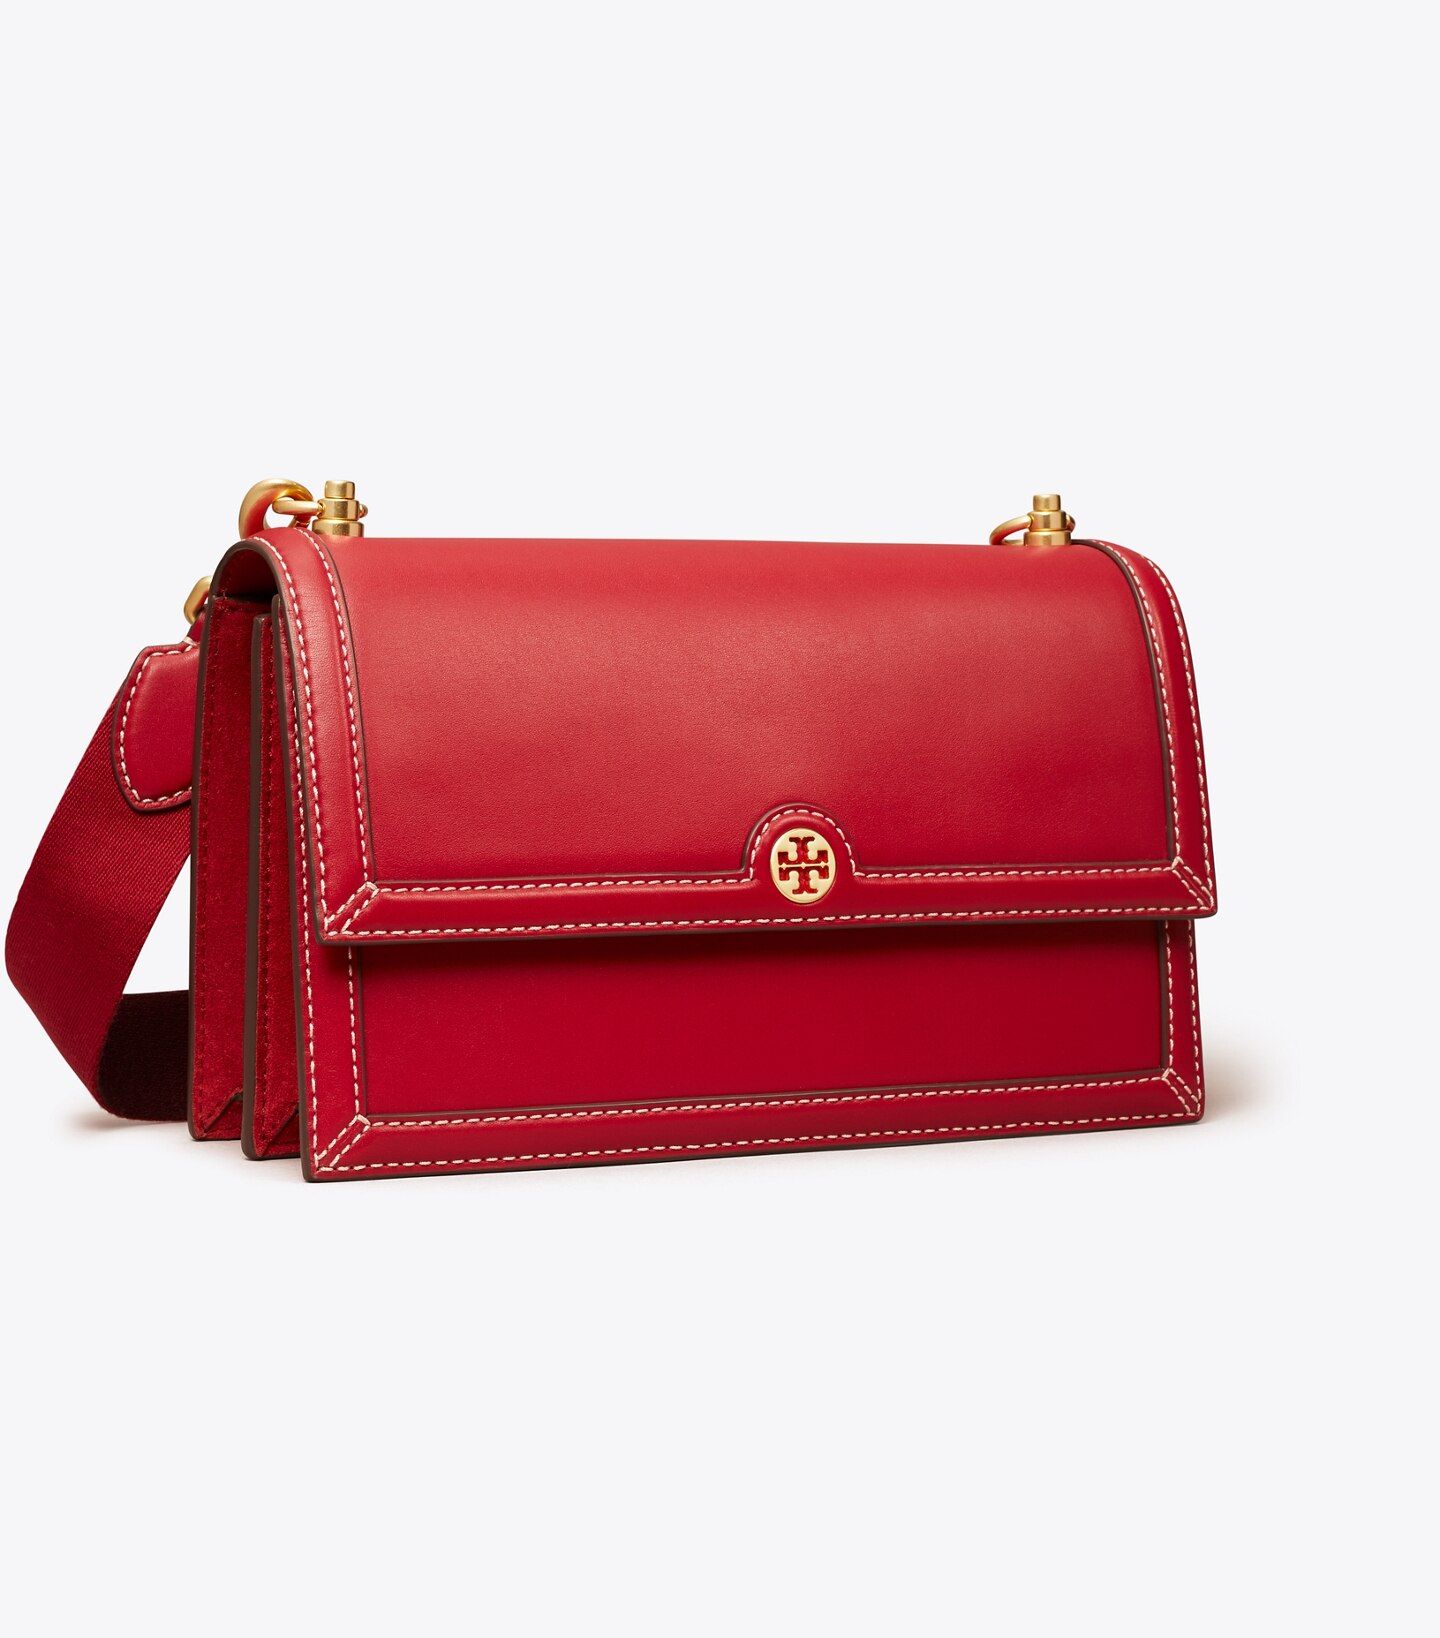 EXCLUSIVE: LEATHER SHOULDER BAG | Tory Burch (US)